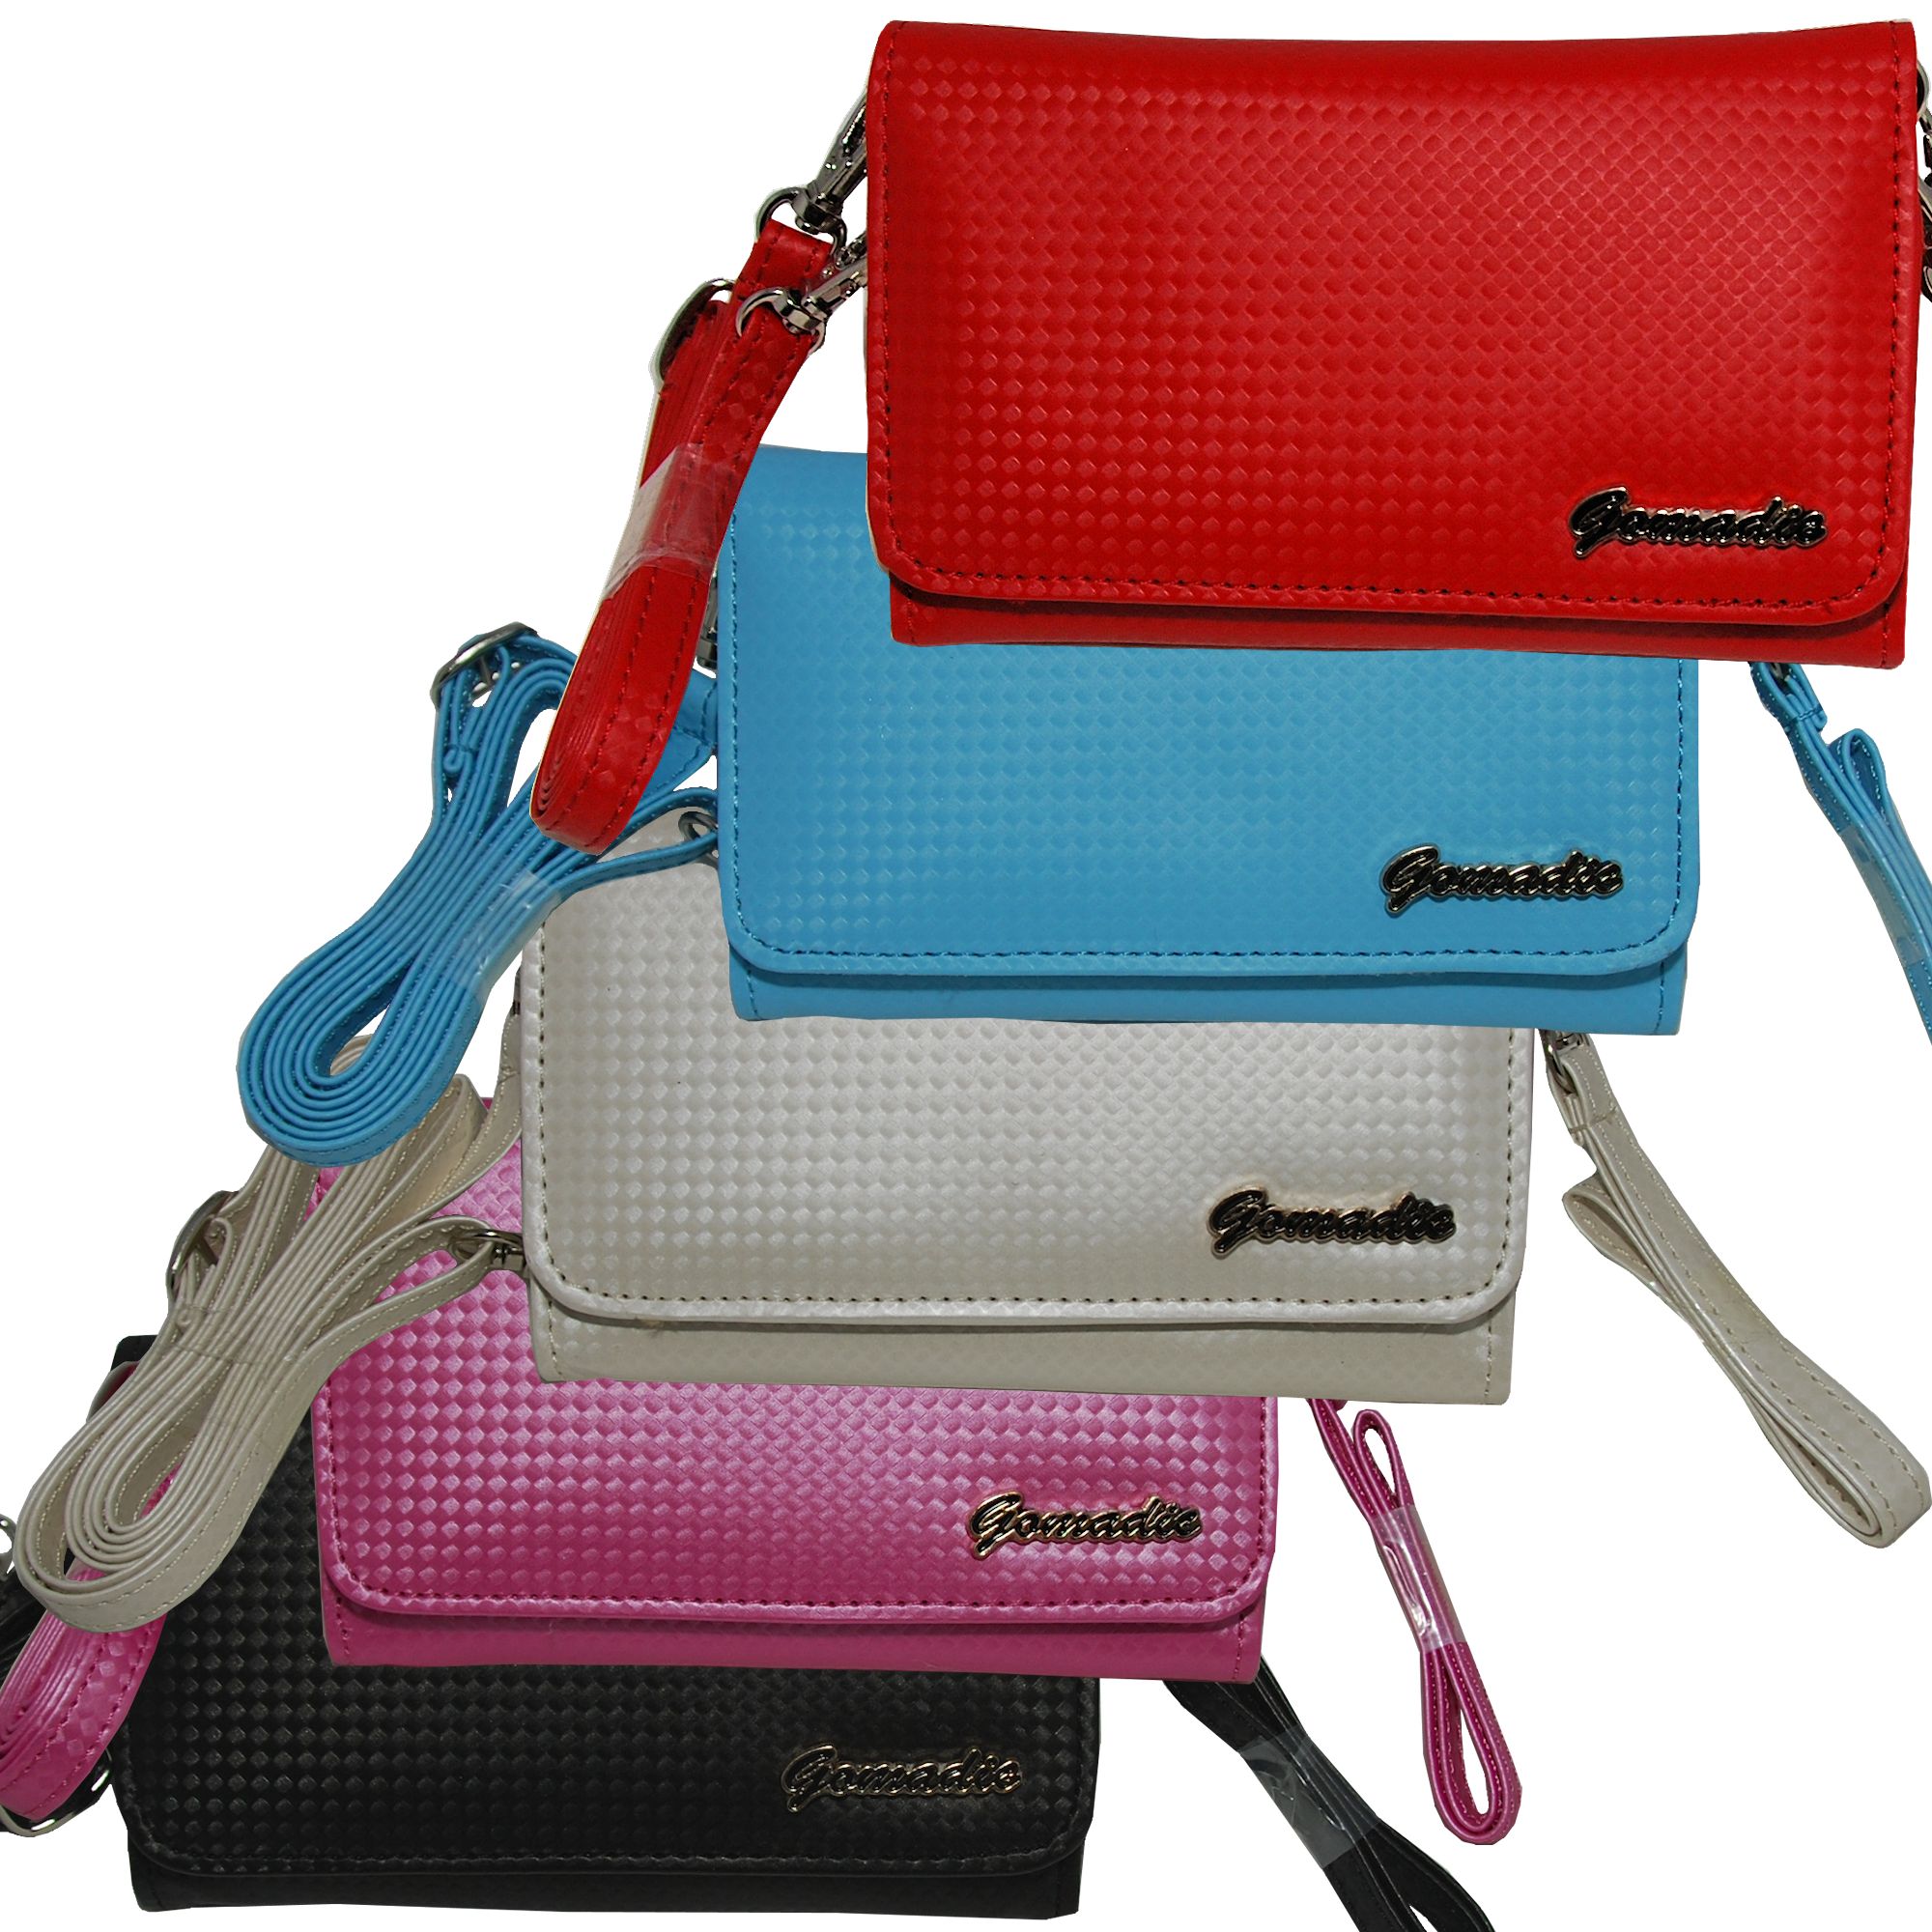 Purse Handbag Case for the Nokia 2630 2660 2680 with both a hand and shoulder loop - Color Options Blue Pink White Black and Red